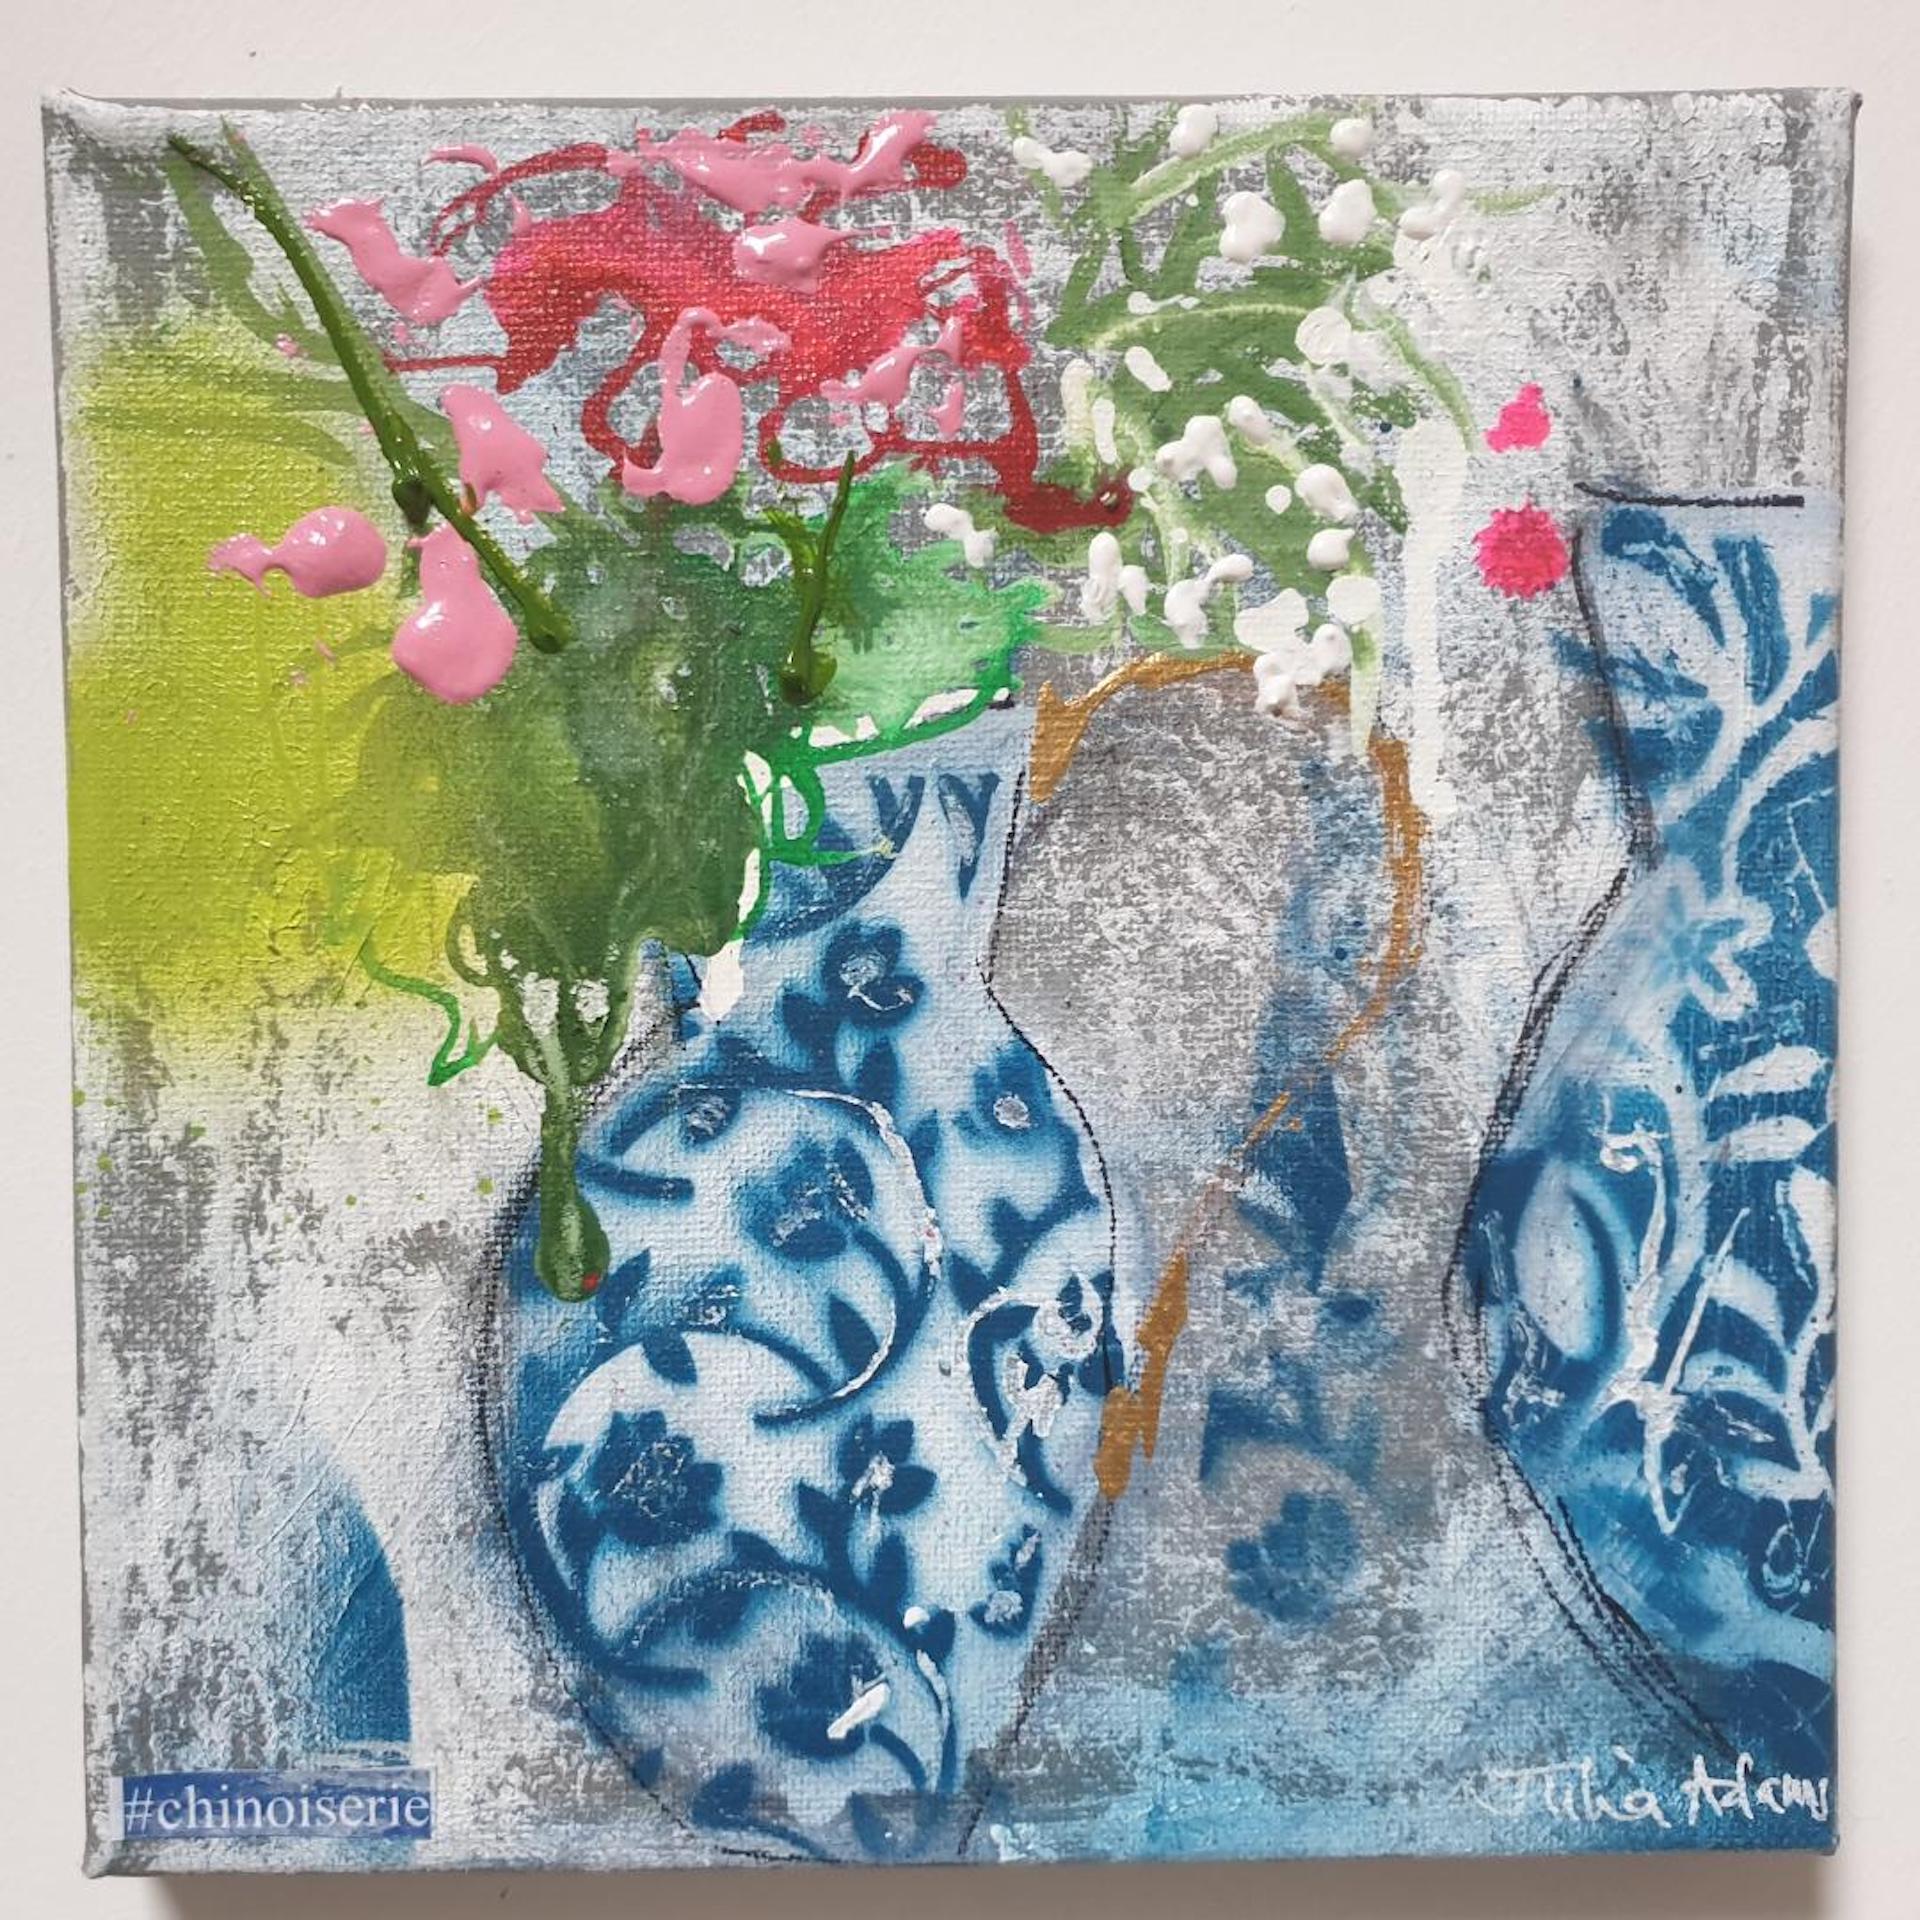 Julia Adams
Chinoiserie
Original Still Life Painting
Mixed Media on Canvas
Canvas Size: H 20cm x W 20cm
Sold Unframed
Please note that insitu images are purely an indication of how a piece may look.

Chinoiserie by Julia Adams is an original mixed